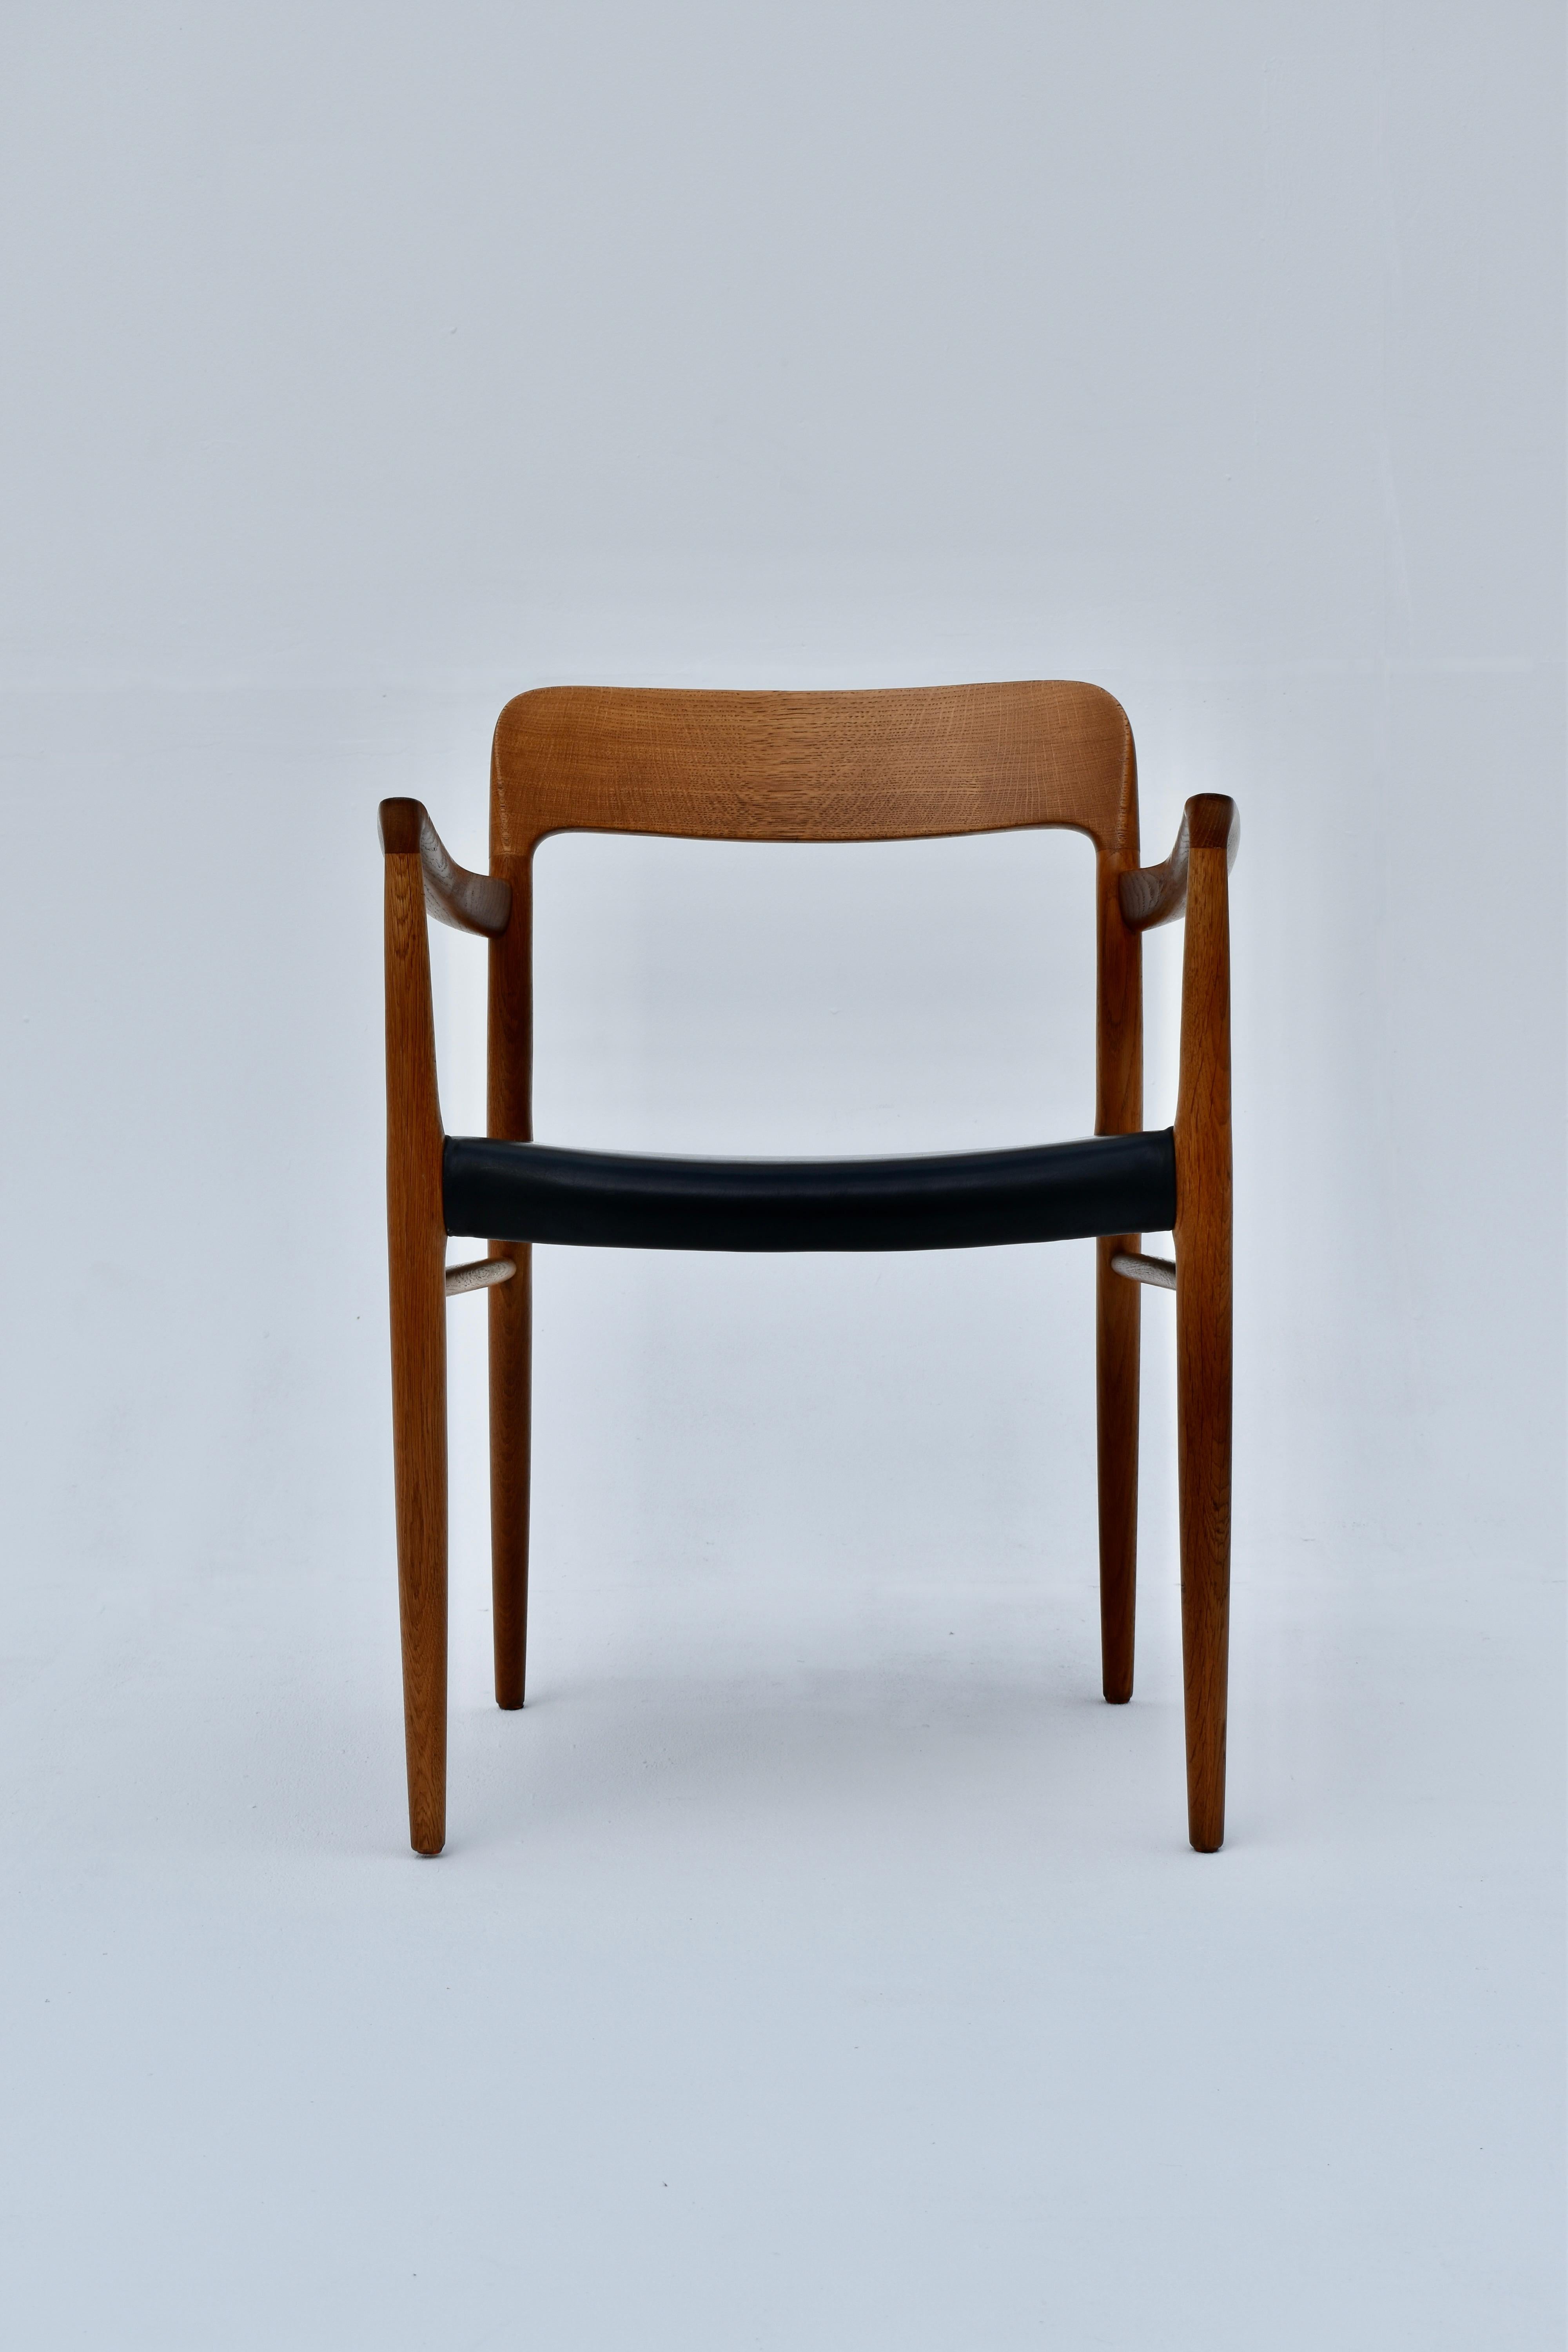 A very handsome and finely crafted chair designed in the early 50’s by Niels Moller.

This design is quite hard to come by, especially so offered in Oak as the majority were produced in Teak.

The timber on this chair exhibits a wonderful honey